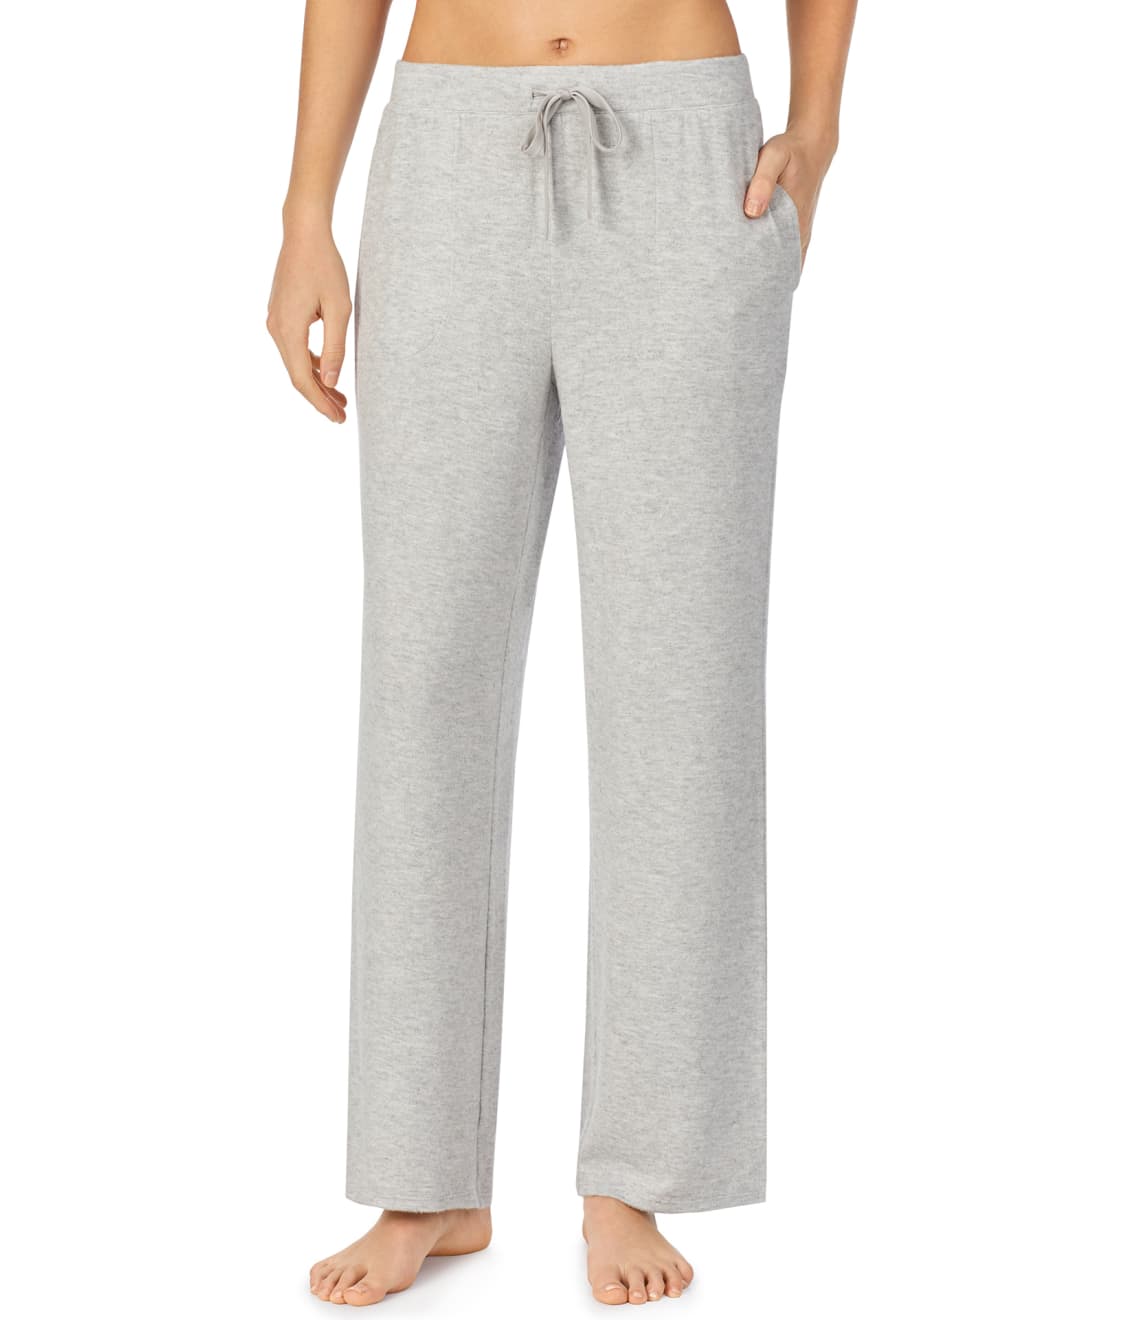 kate spade new york Soft Knit Lounge Pants & Reviews | Bare Necessities ...